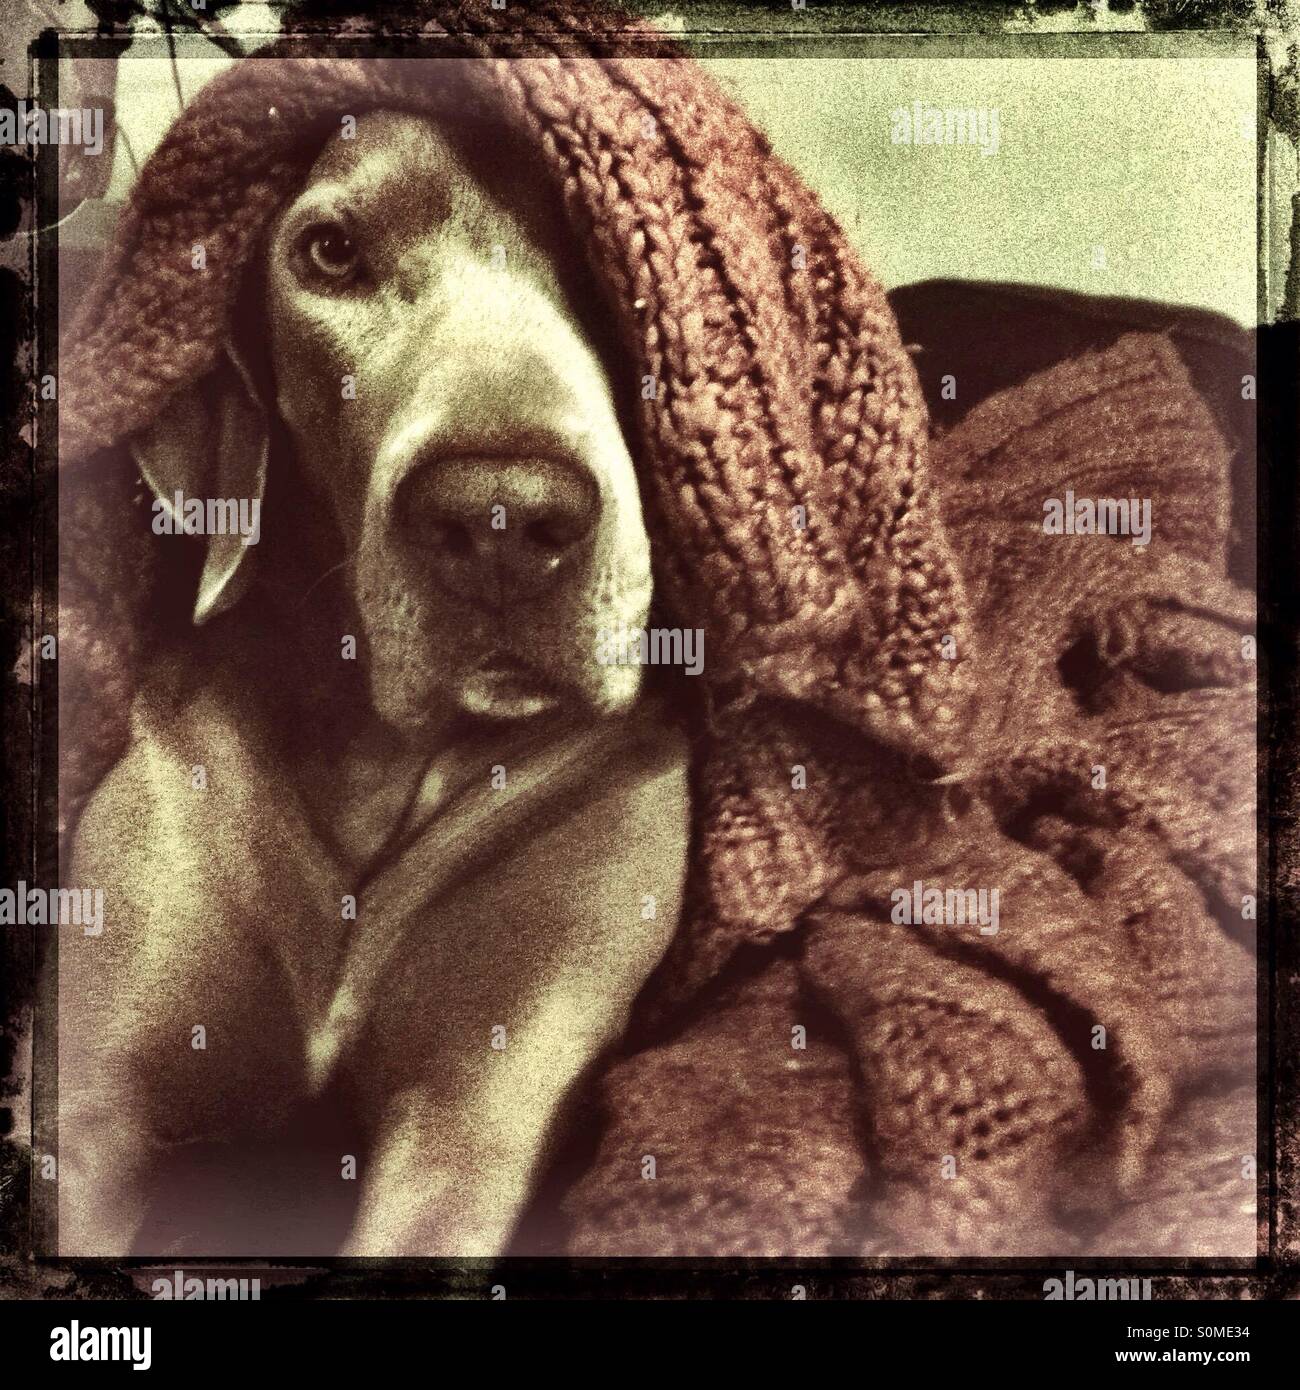 Weimaraner dog laying down peaking out from under a knit blanket Stock Photo